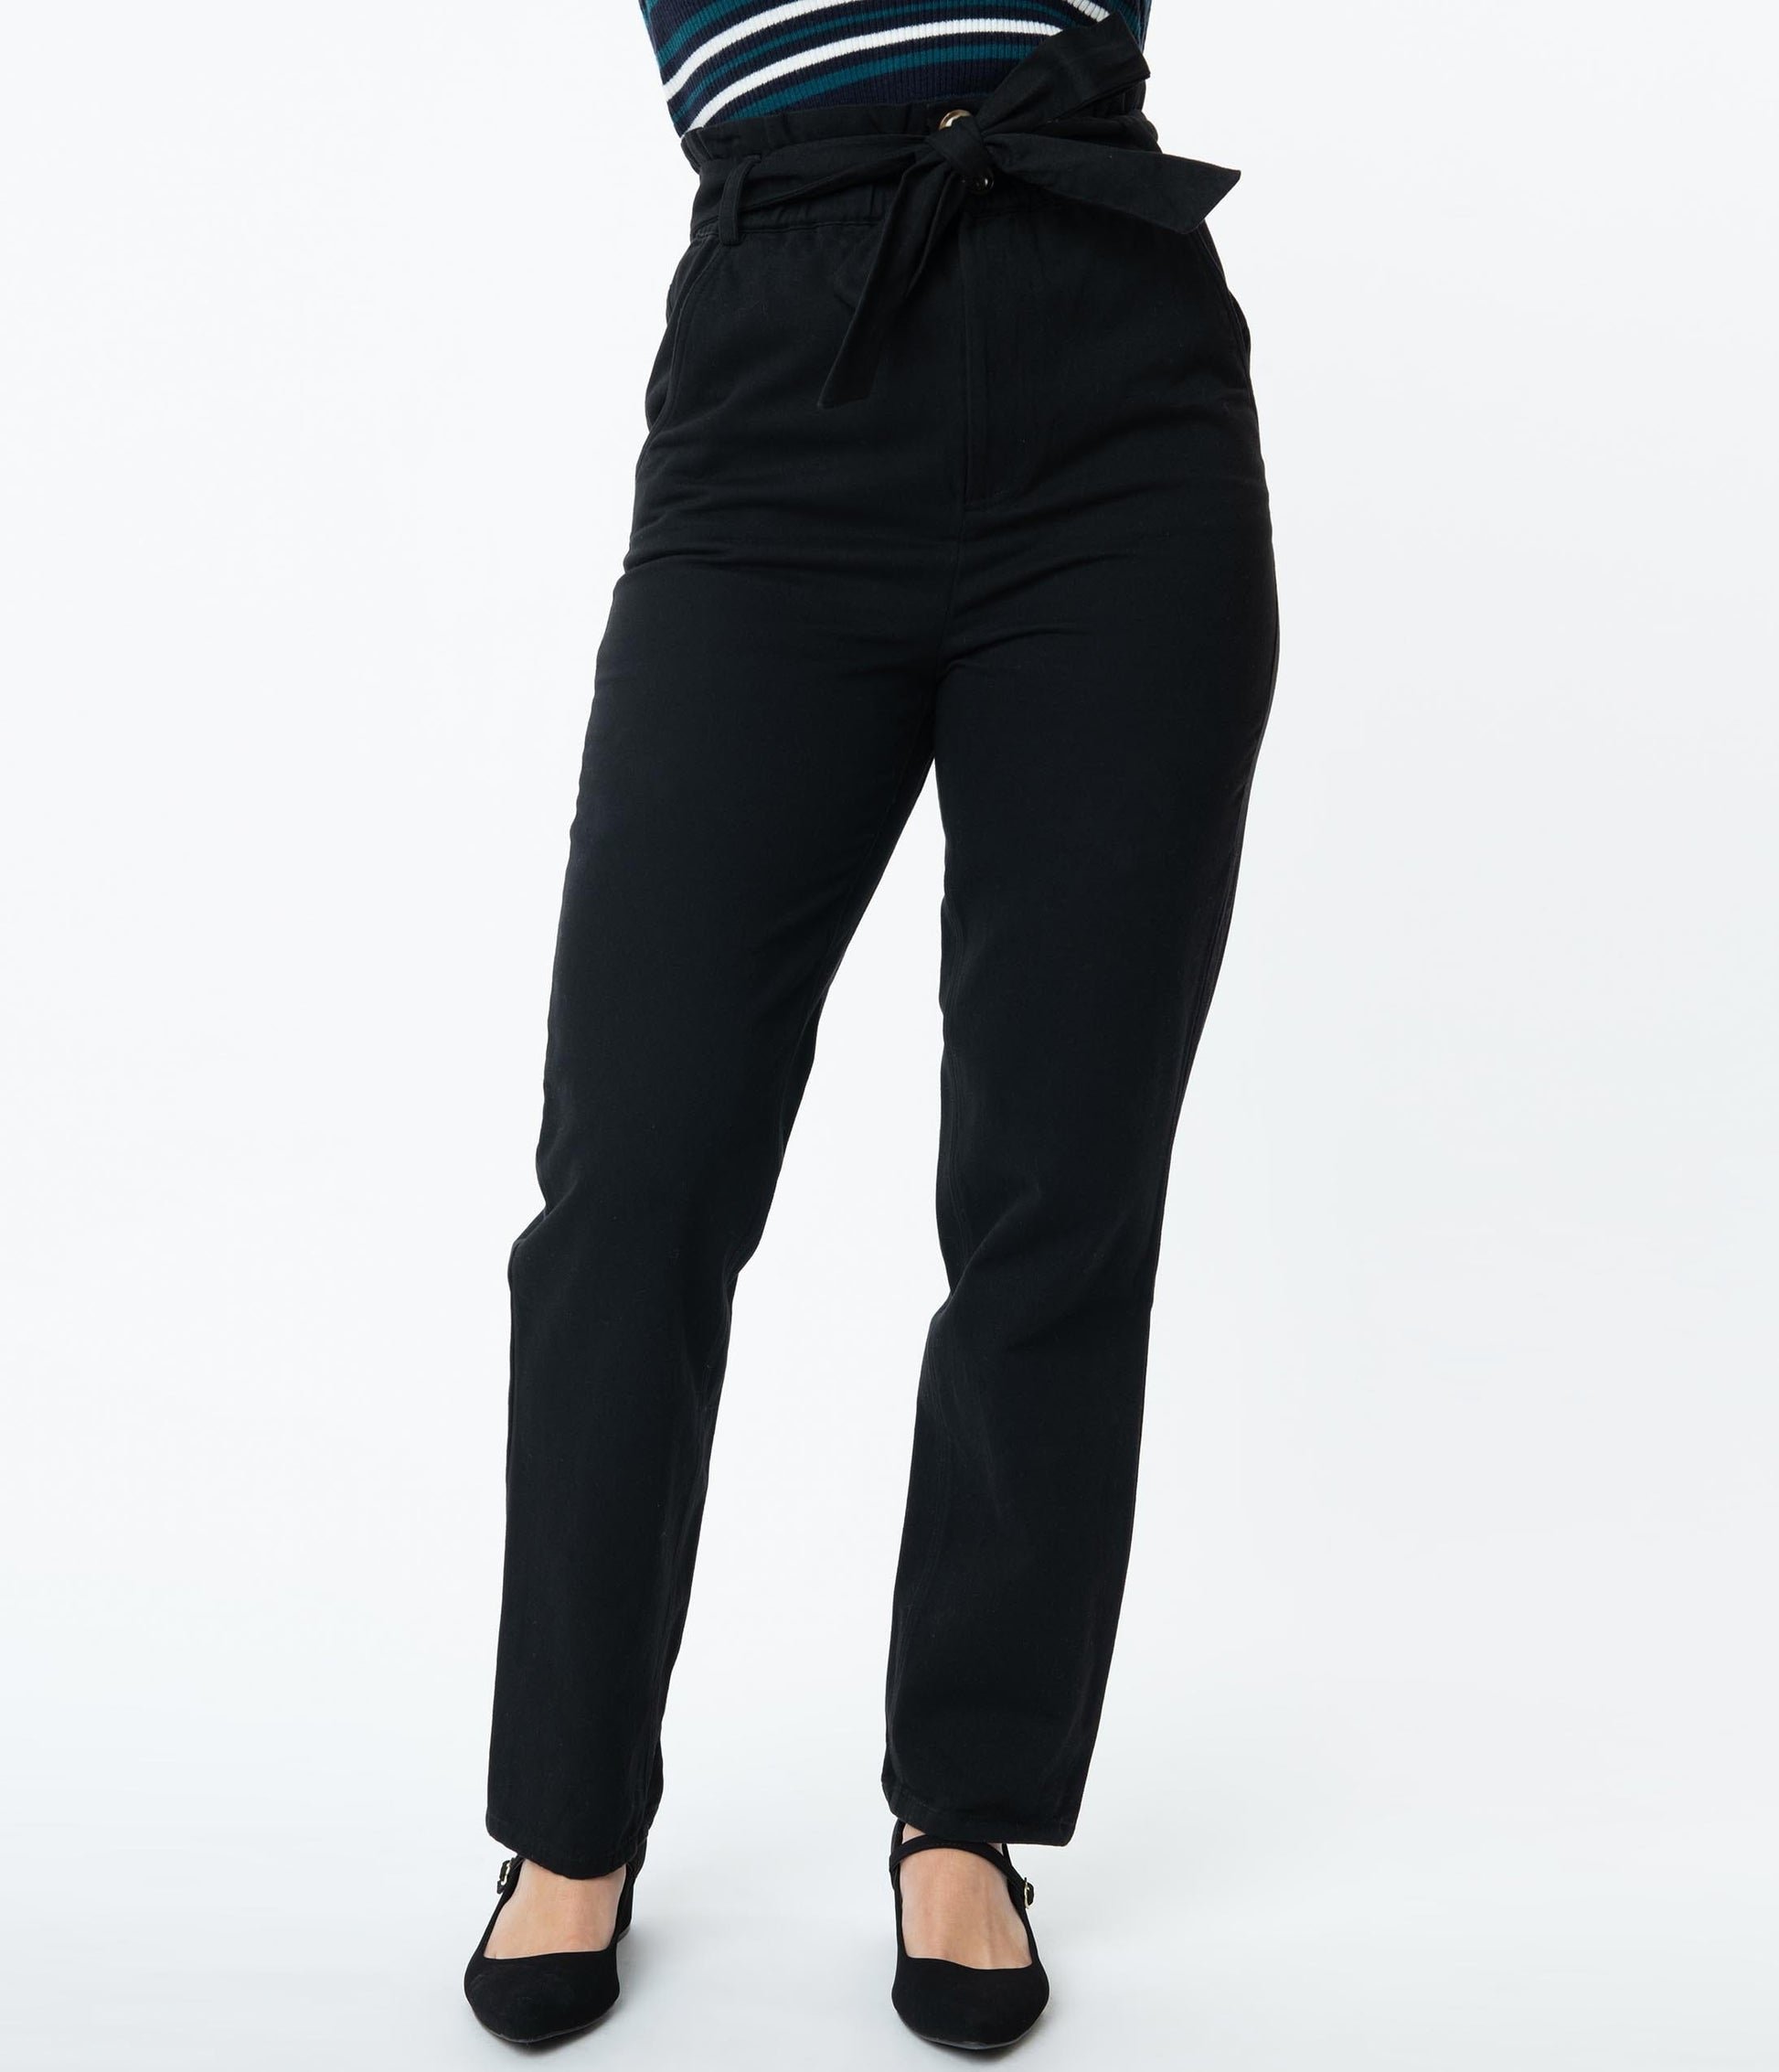 Retro Style Black Paperbag High Waisted Pants